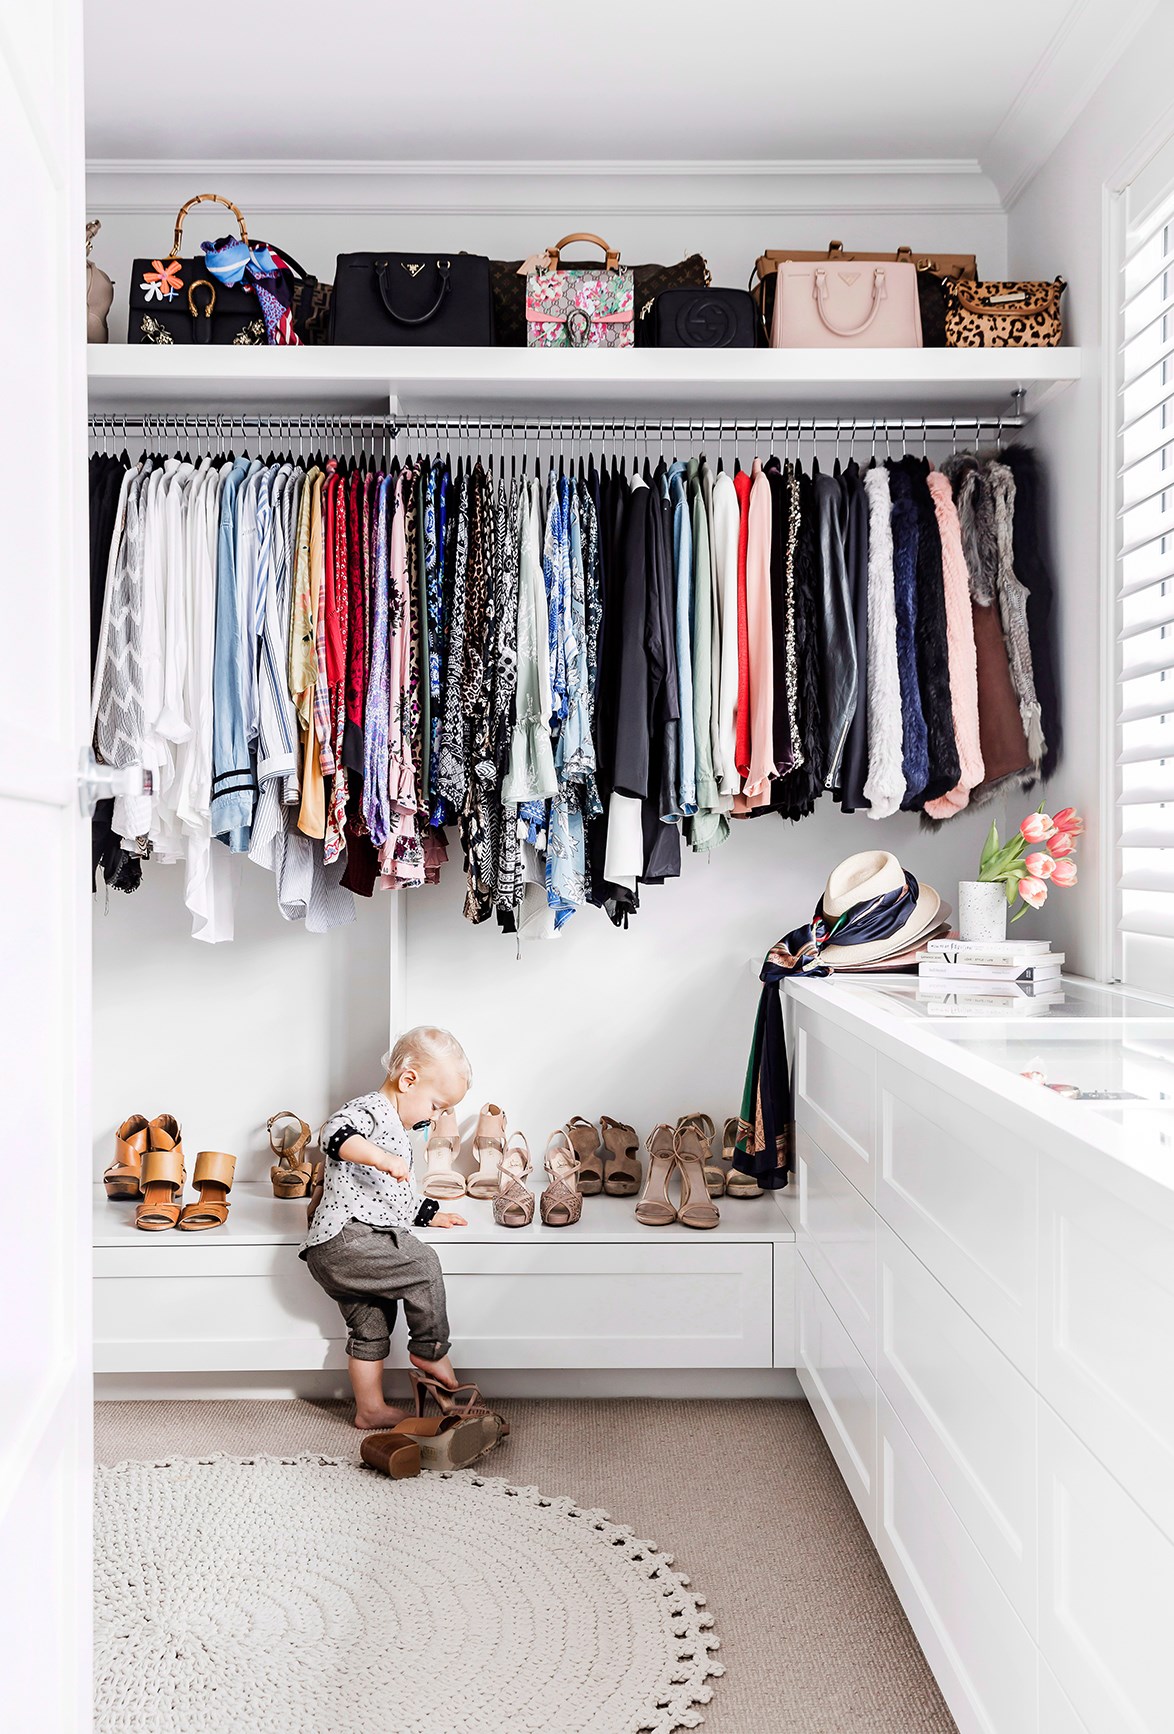 Is your wardrobe quite literally bursting at the seams? Let this beautiful wardrobes inspire you to [organise your own](https://www.homestolove.com.au/how-to-organise-your-wardrobe-6984|target="_blank"). You'll be amazed at how much time you save in the morning! *Photo:* Maree Homer / *bauersyndication.com.au*